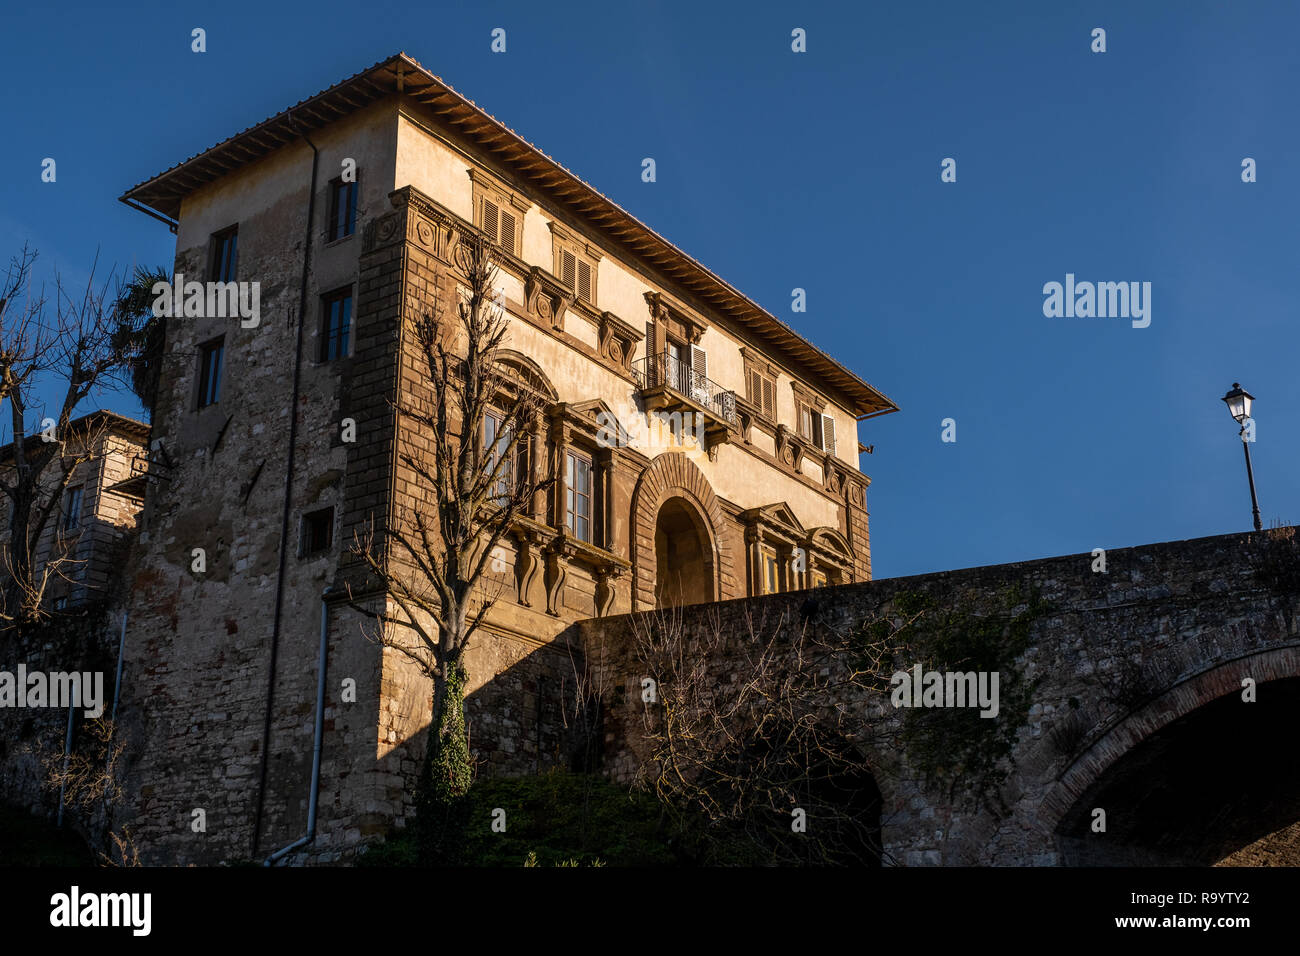 Palazzo Campana, the gateway to the oldest part of the town of Colle Val d'Elsa, Siena, Tuscany Stock Photo